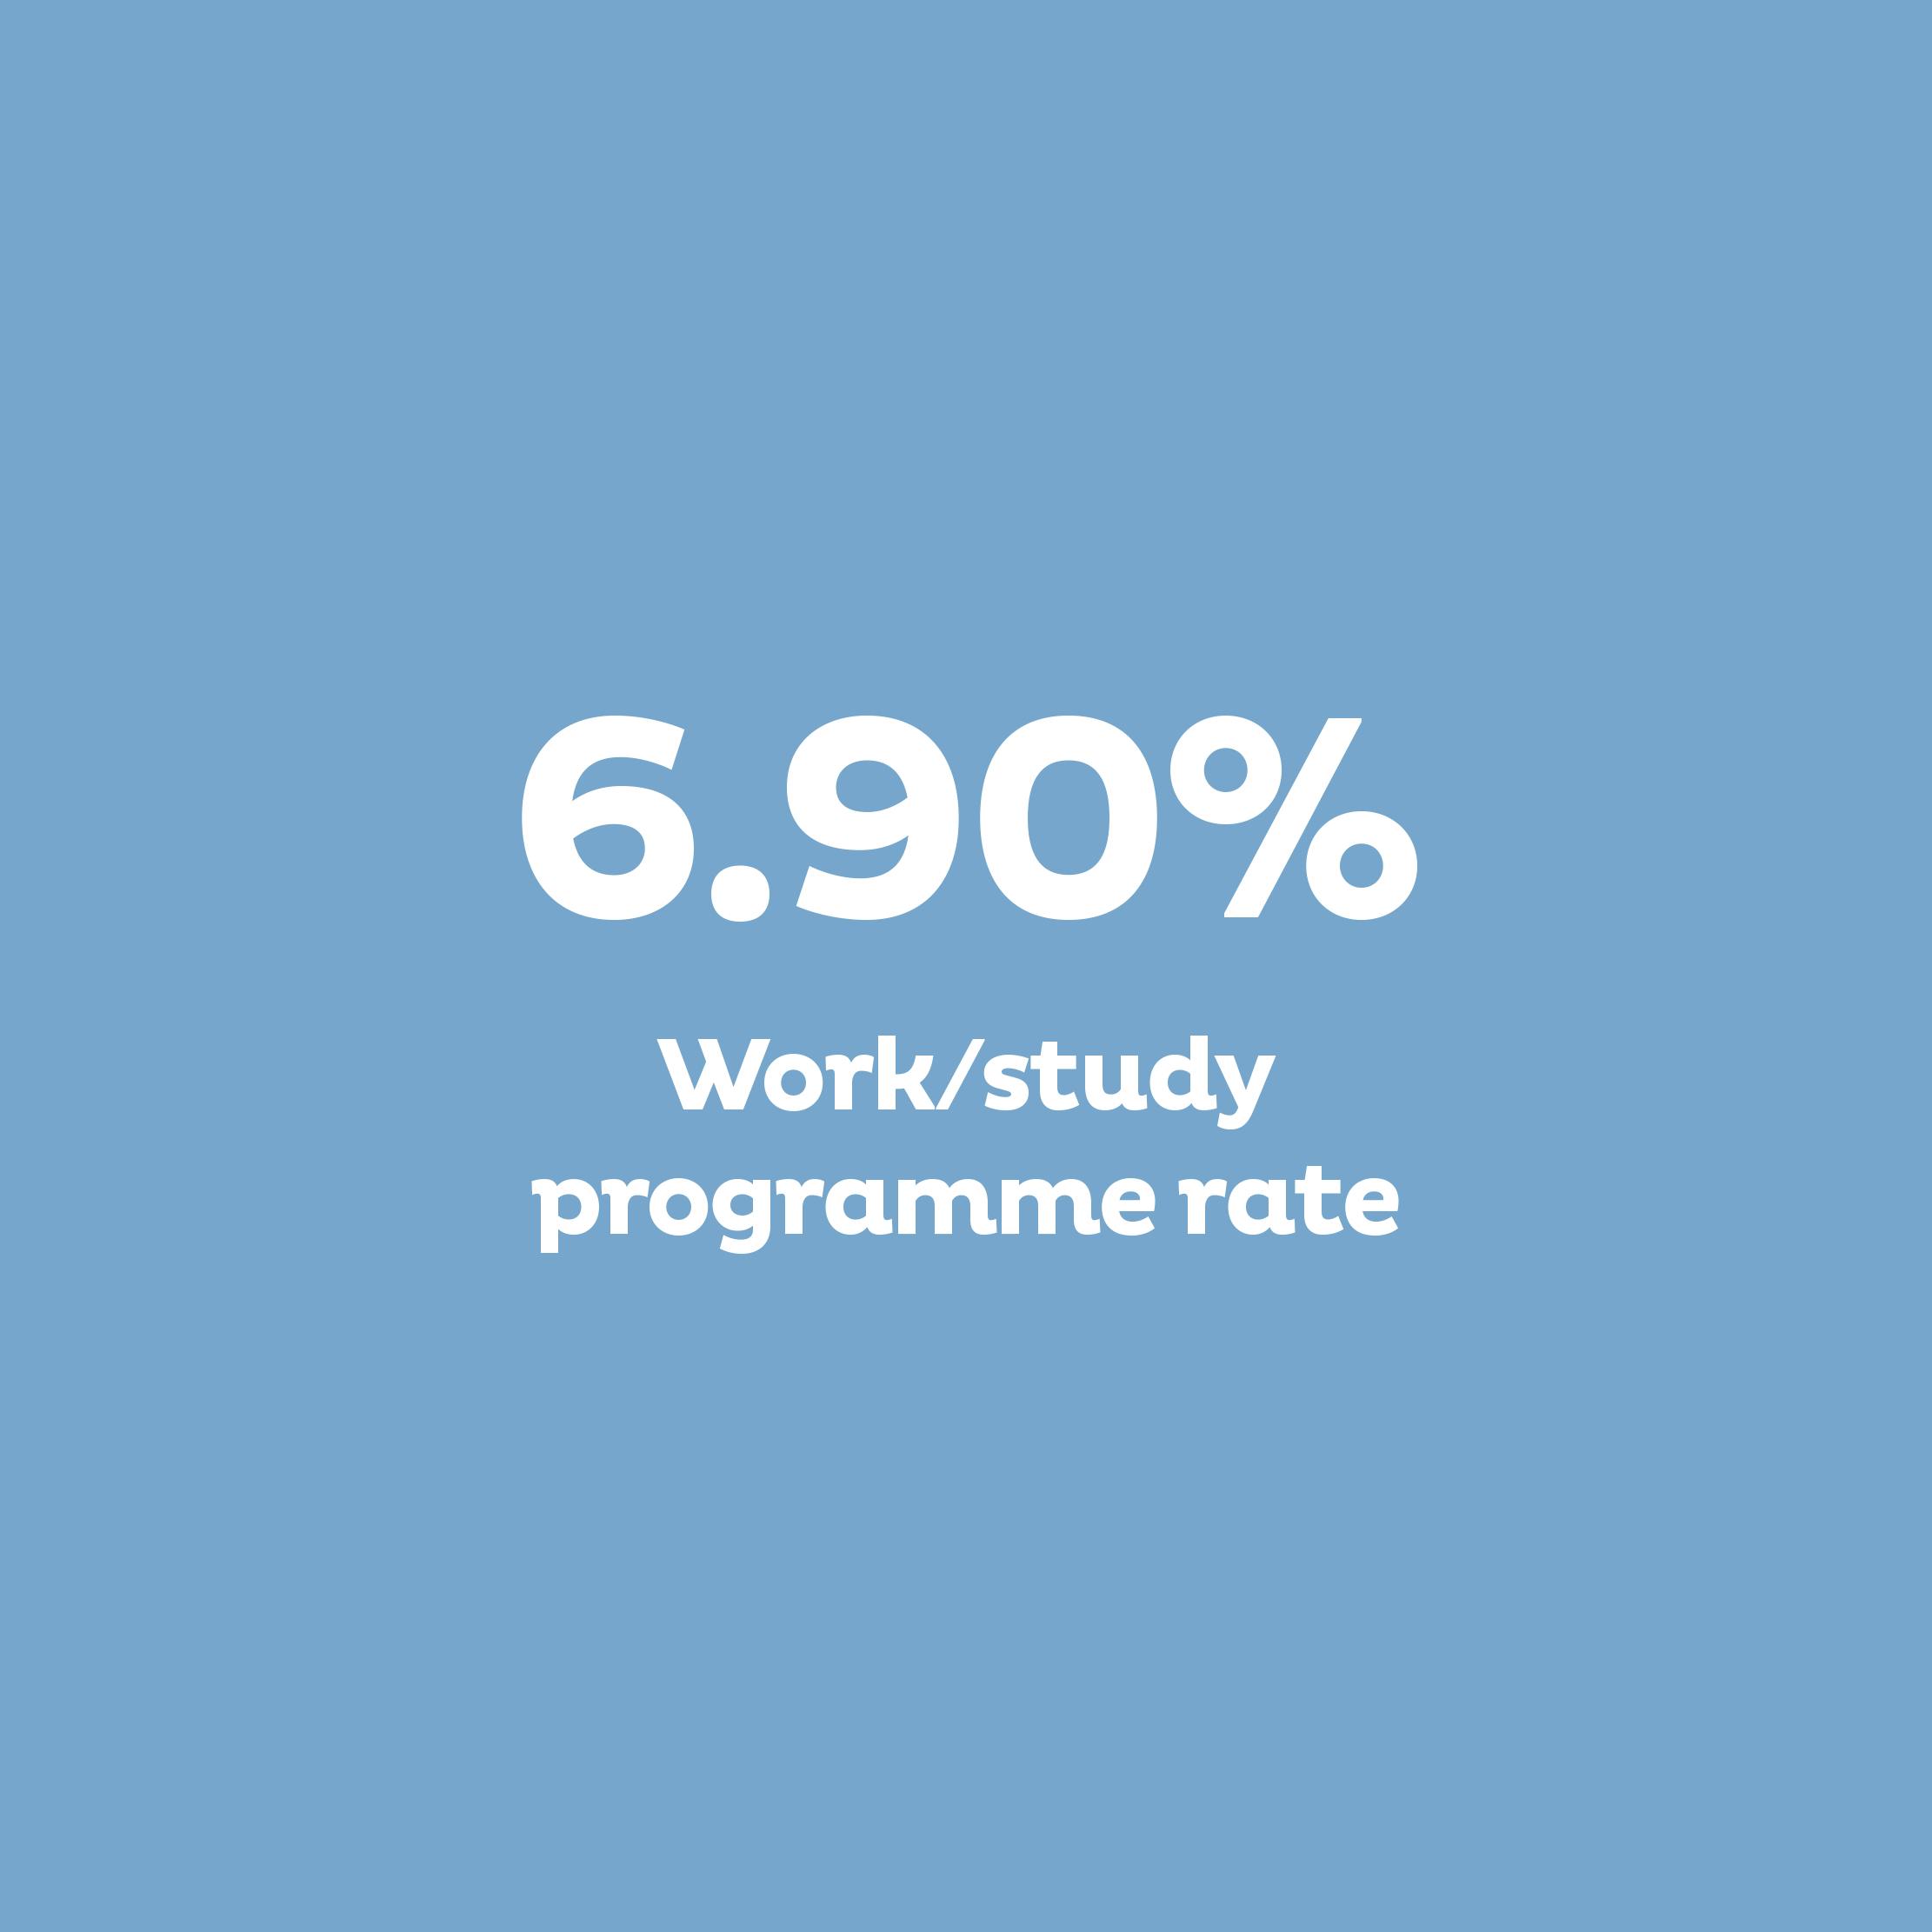 6.90% Work/study programme rate